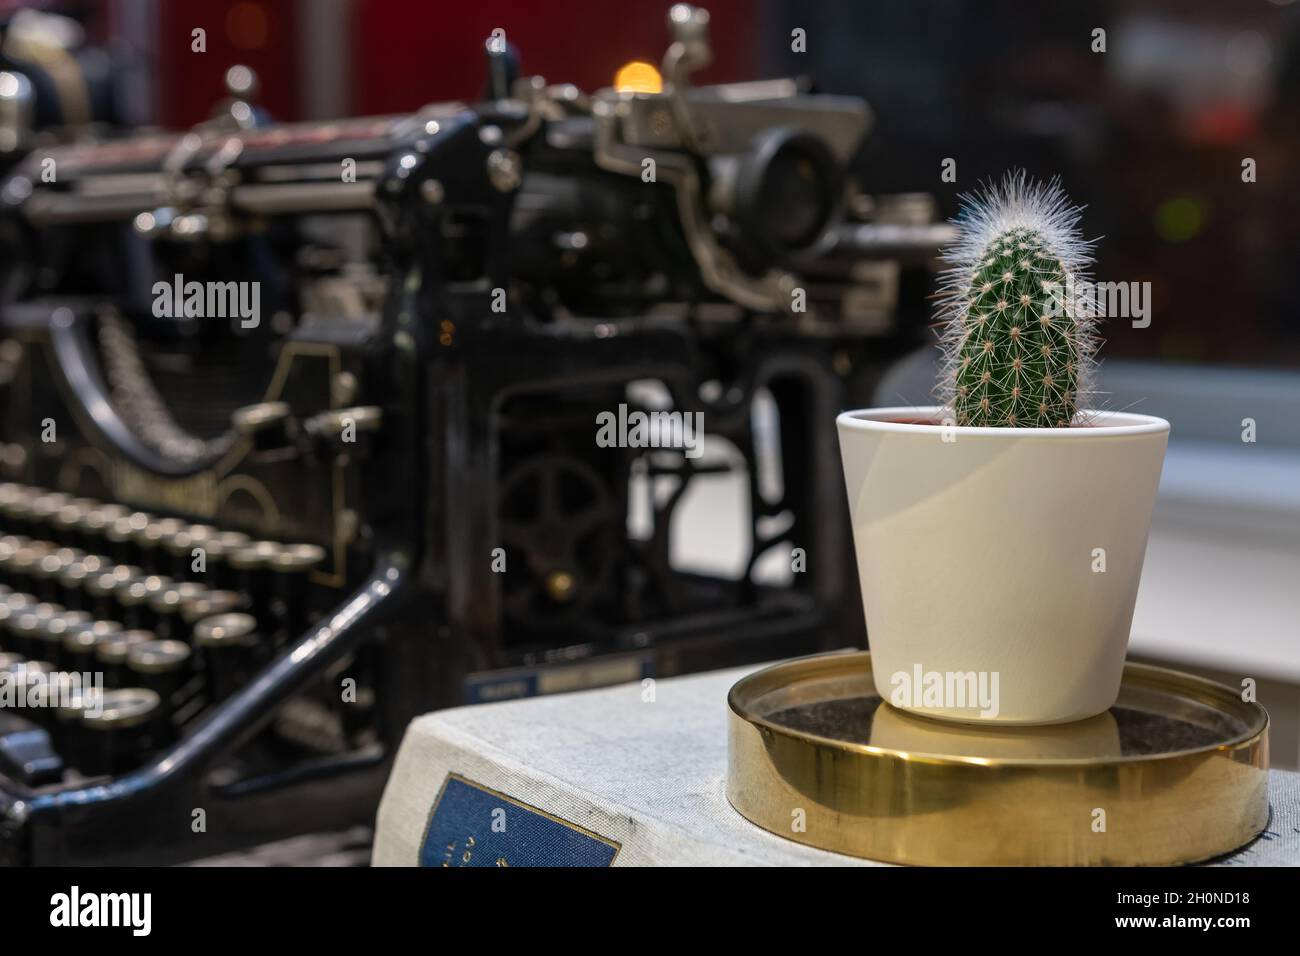 Cactus in a pot on an old typewriter background. Stock Photo